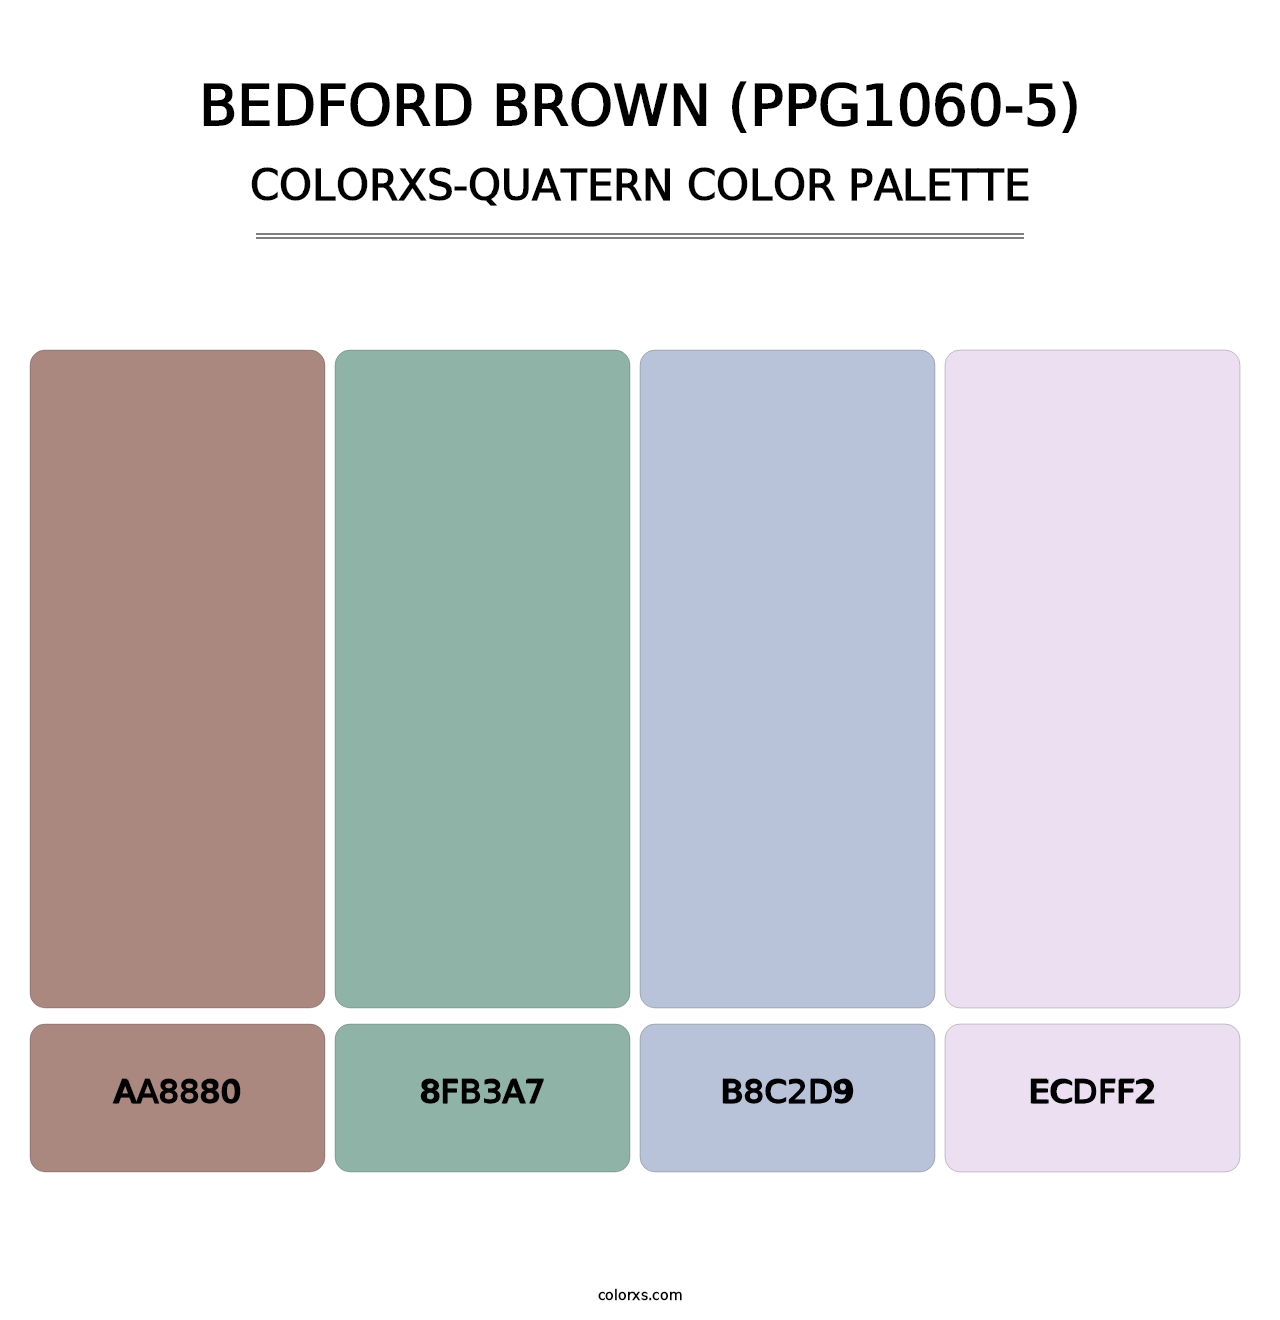 Bedford Brown (PPG1060-5) - Colorxs Quatern Palette